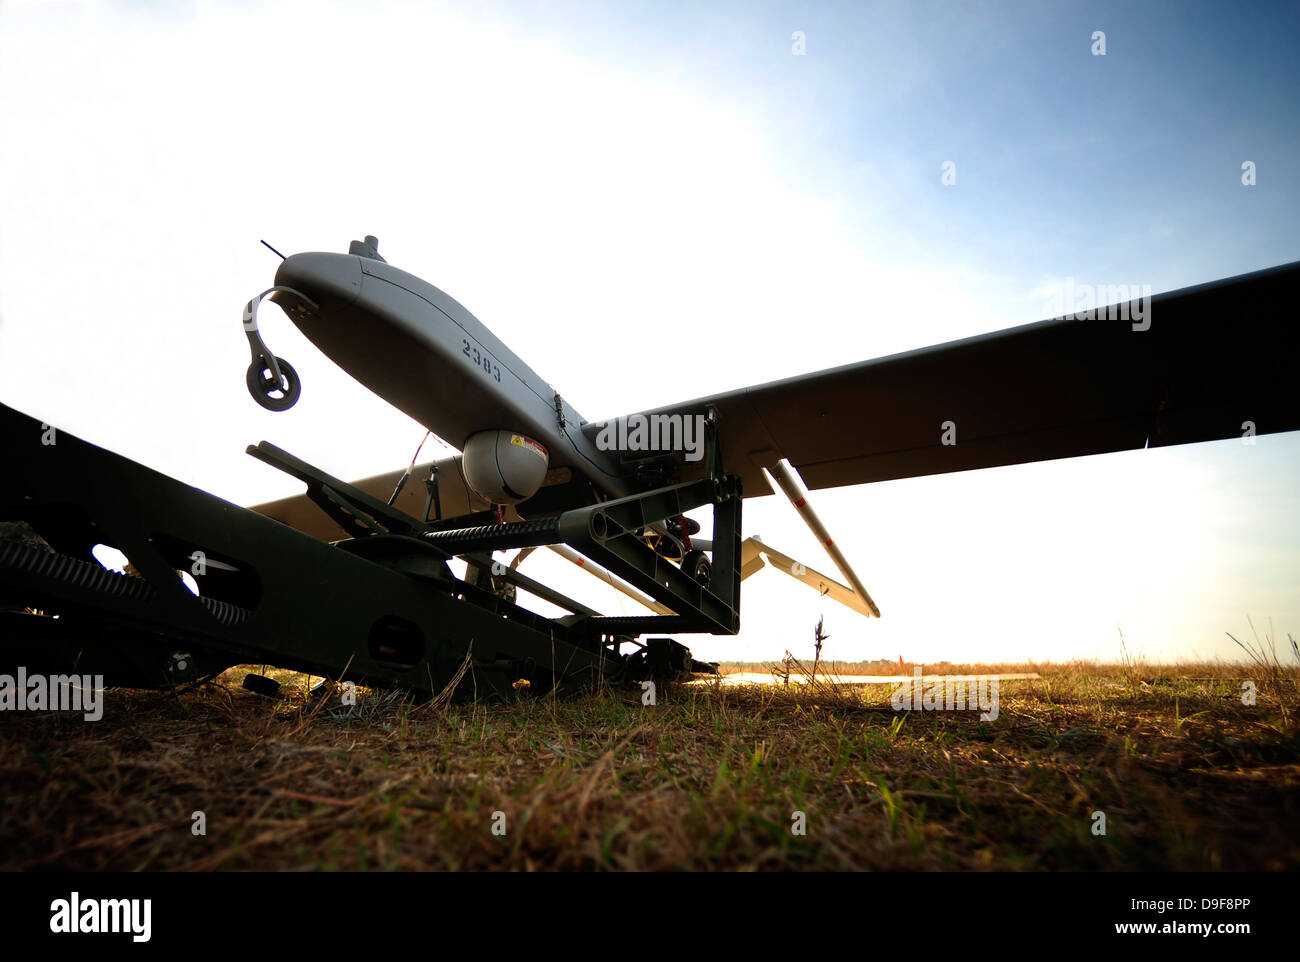 An RQ-7B Shadow unmanned aerial vehicle on its launcher. Stock Photo